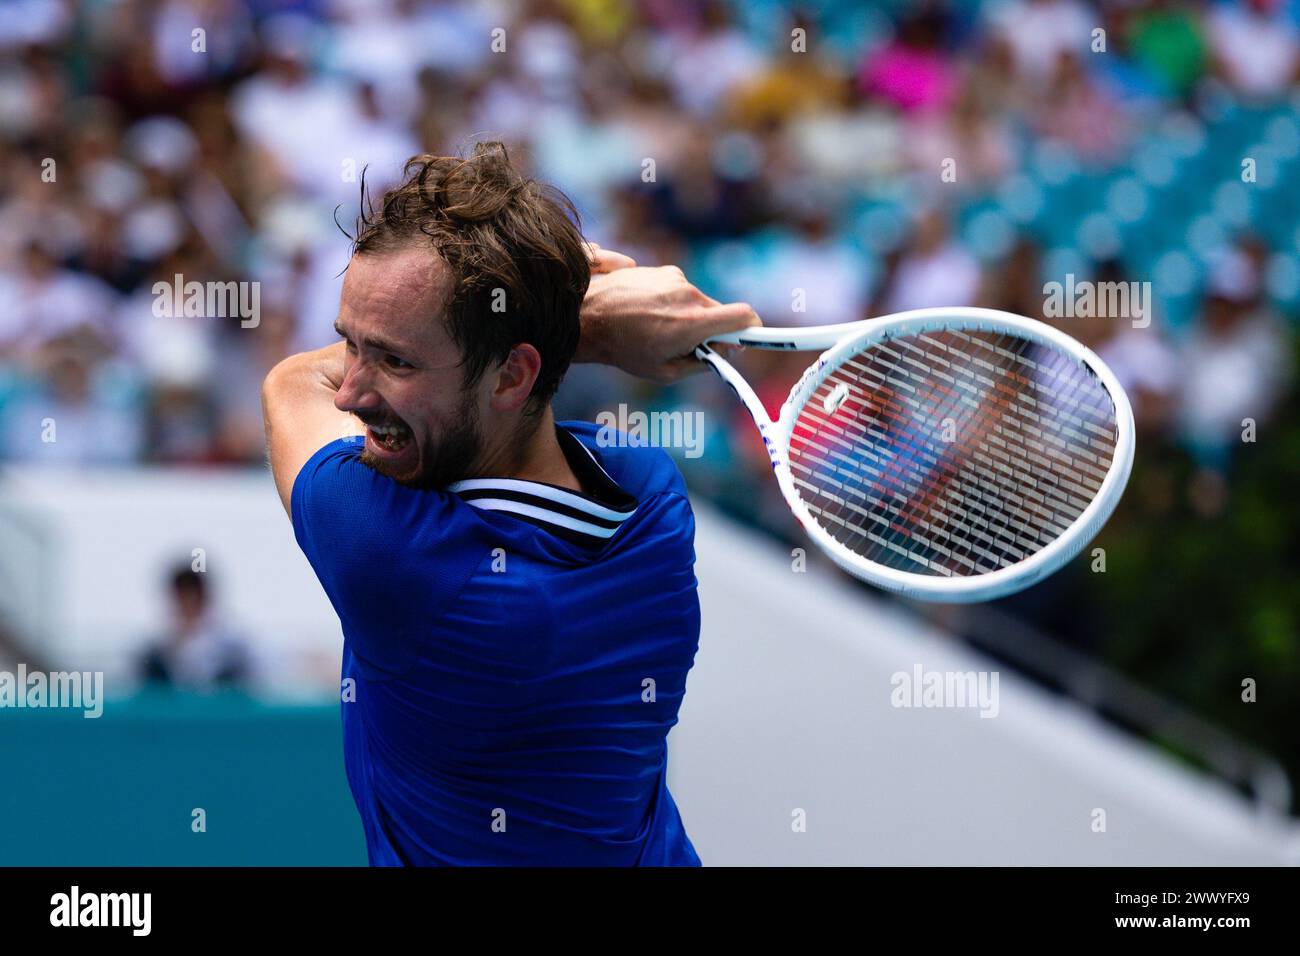 MIAMI GARDENS, FLORIDA - MARCH 26: Daniil Medvedev returns a shot against Dominik Koepfer of Germany during their match on Day 11 of the Miami Open at Hard Rock Stadium on March 26, 2024 in Miami Gardens, Florida. (Photo by Mauricio Paiz) Stock Photo